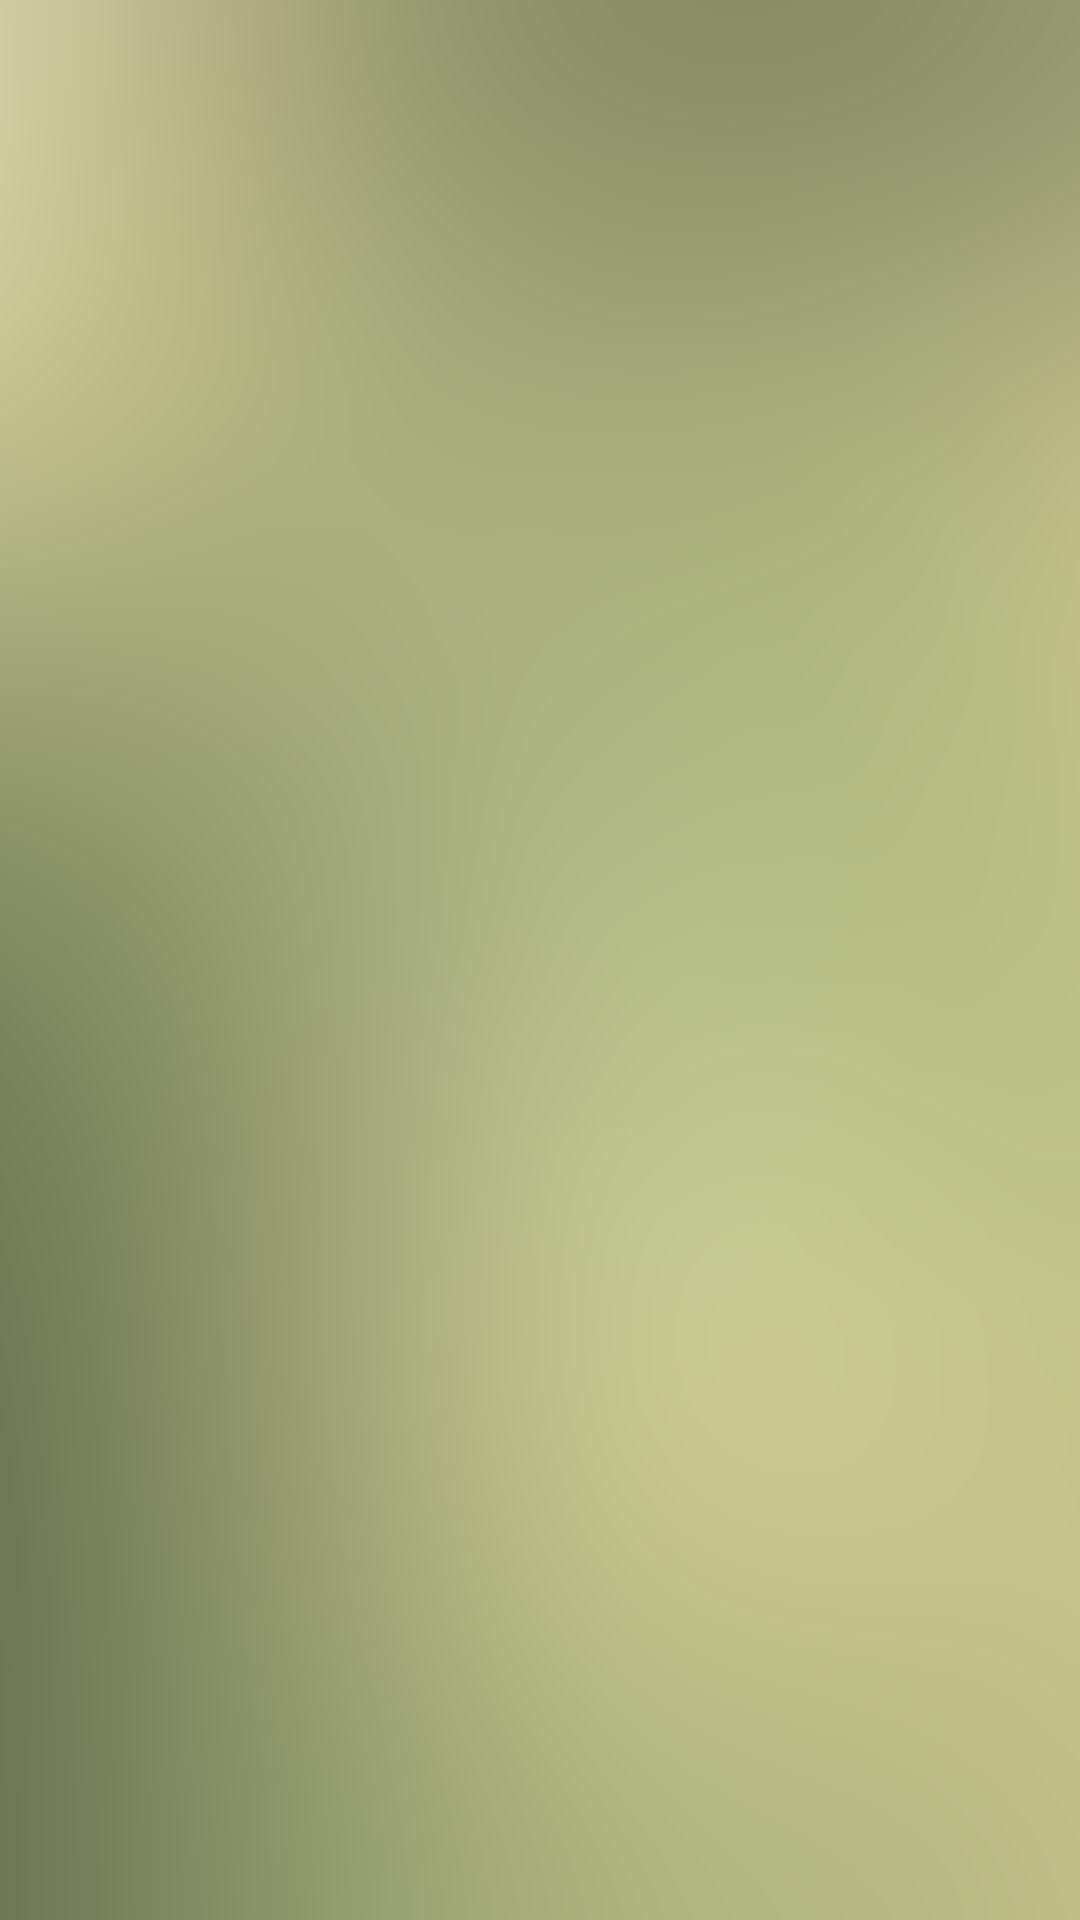 Nature Light Green Gradient android wallpaper